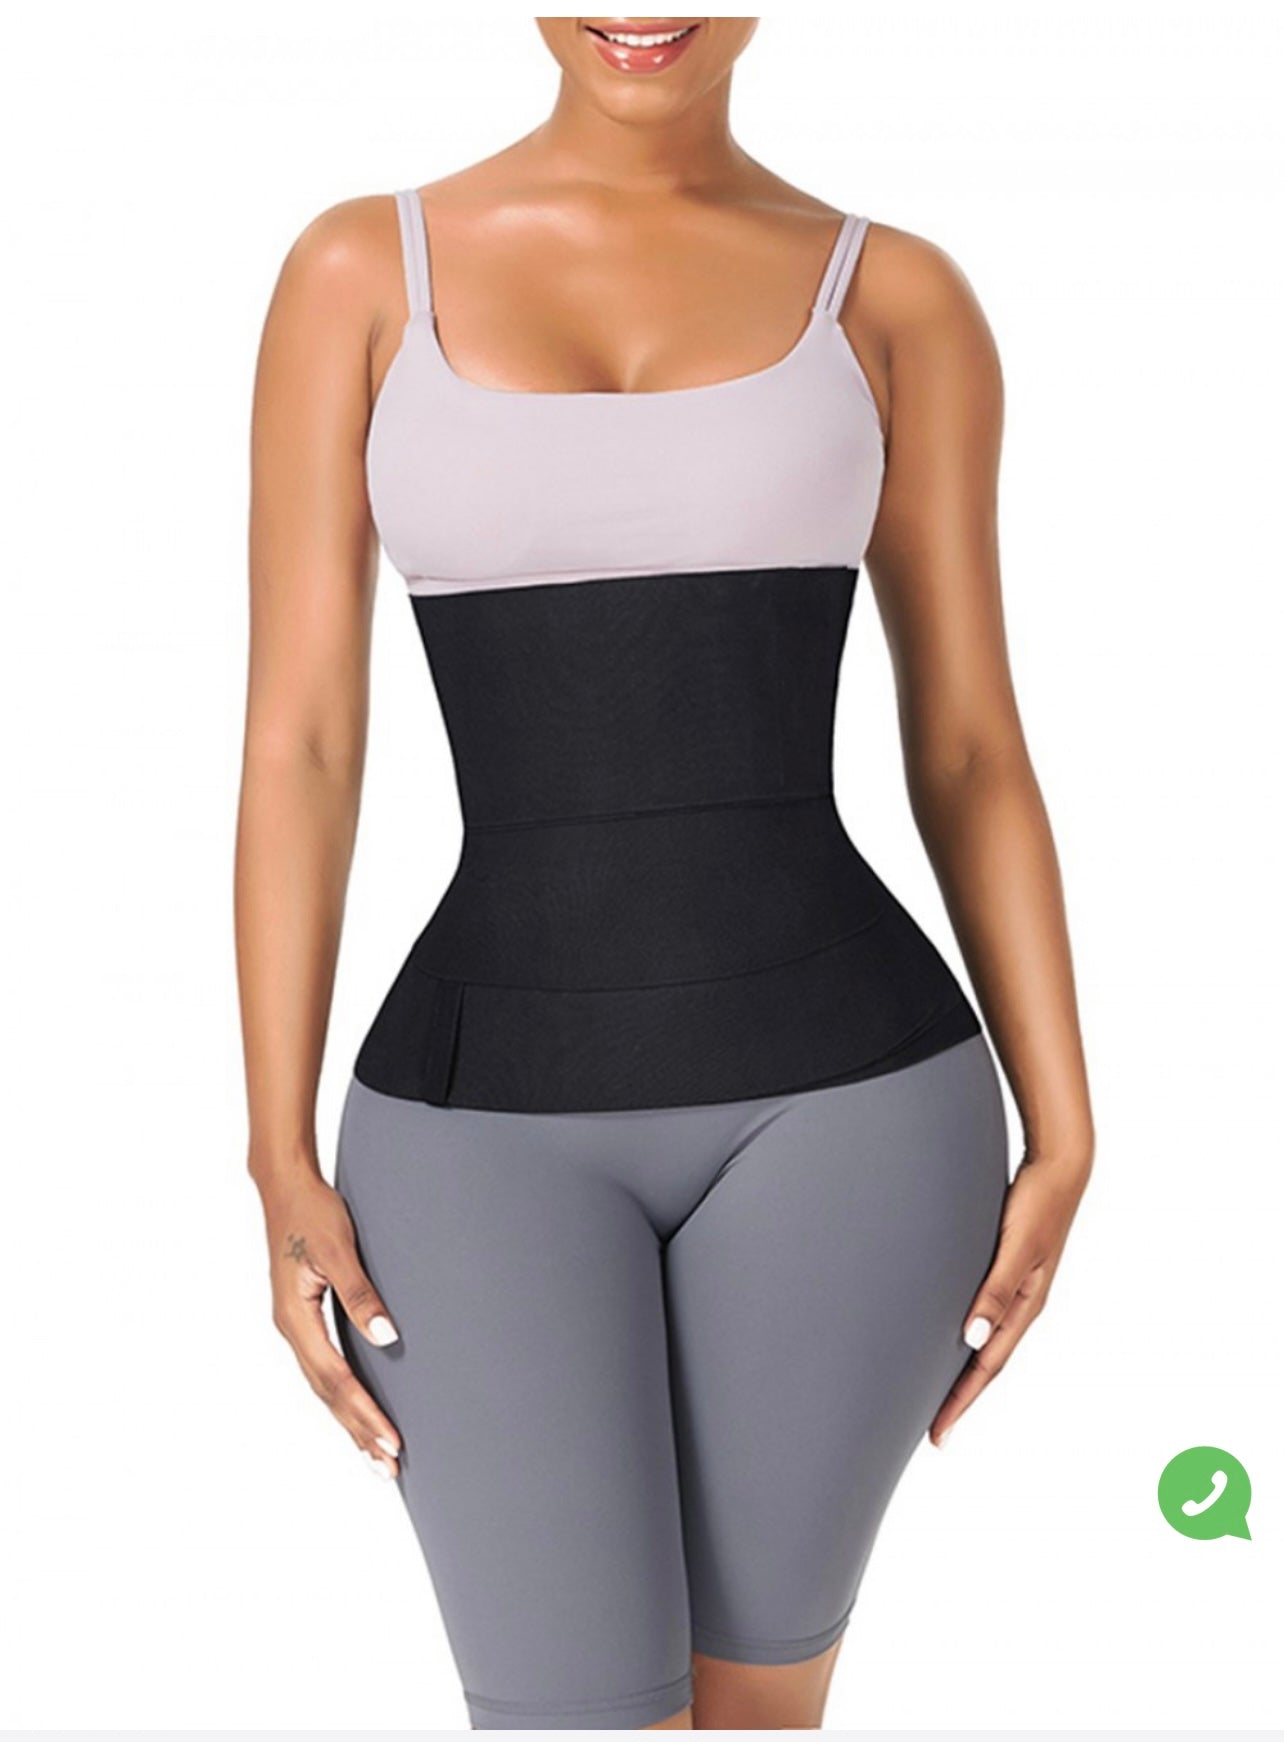 easywrap waist trainer/ one size fit all